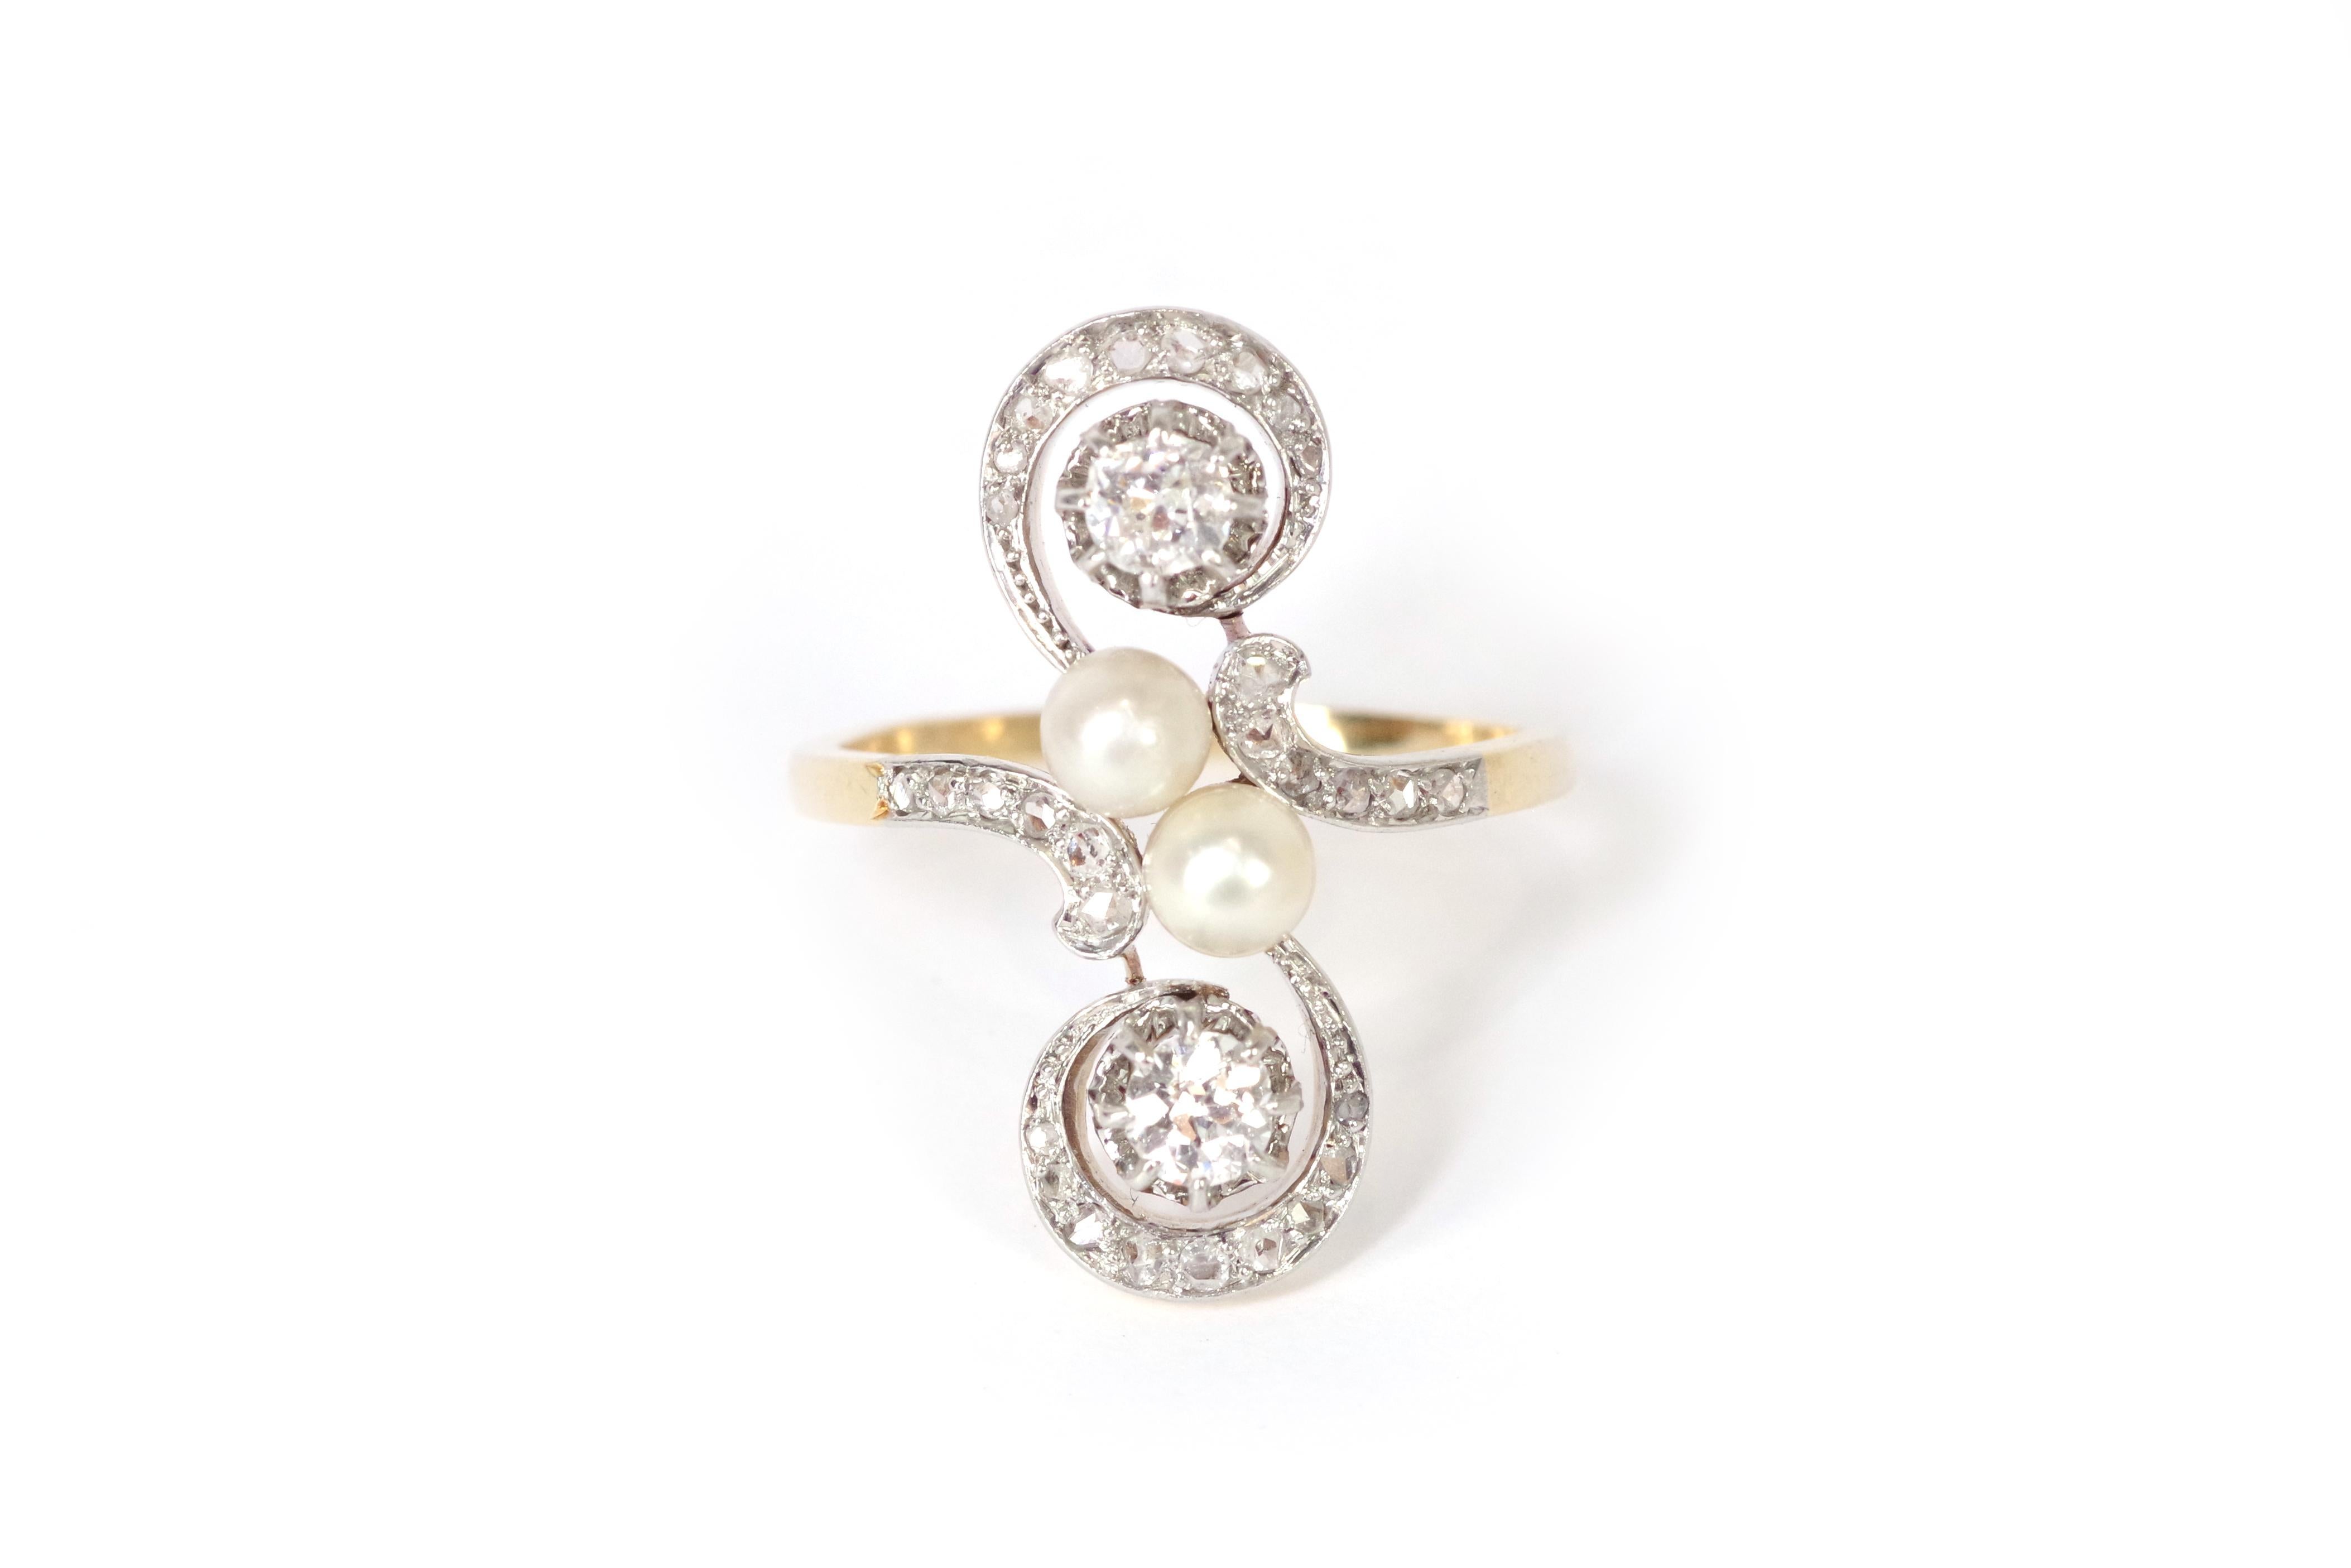 Edwardian pearl diamond ring in 18-karat gold and platinum with pearls and diamonds. This substantial ring features intricate scrollwork, centered with two likely natural pearls arranged in a 